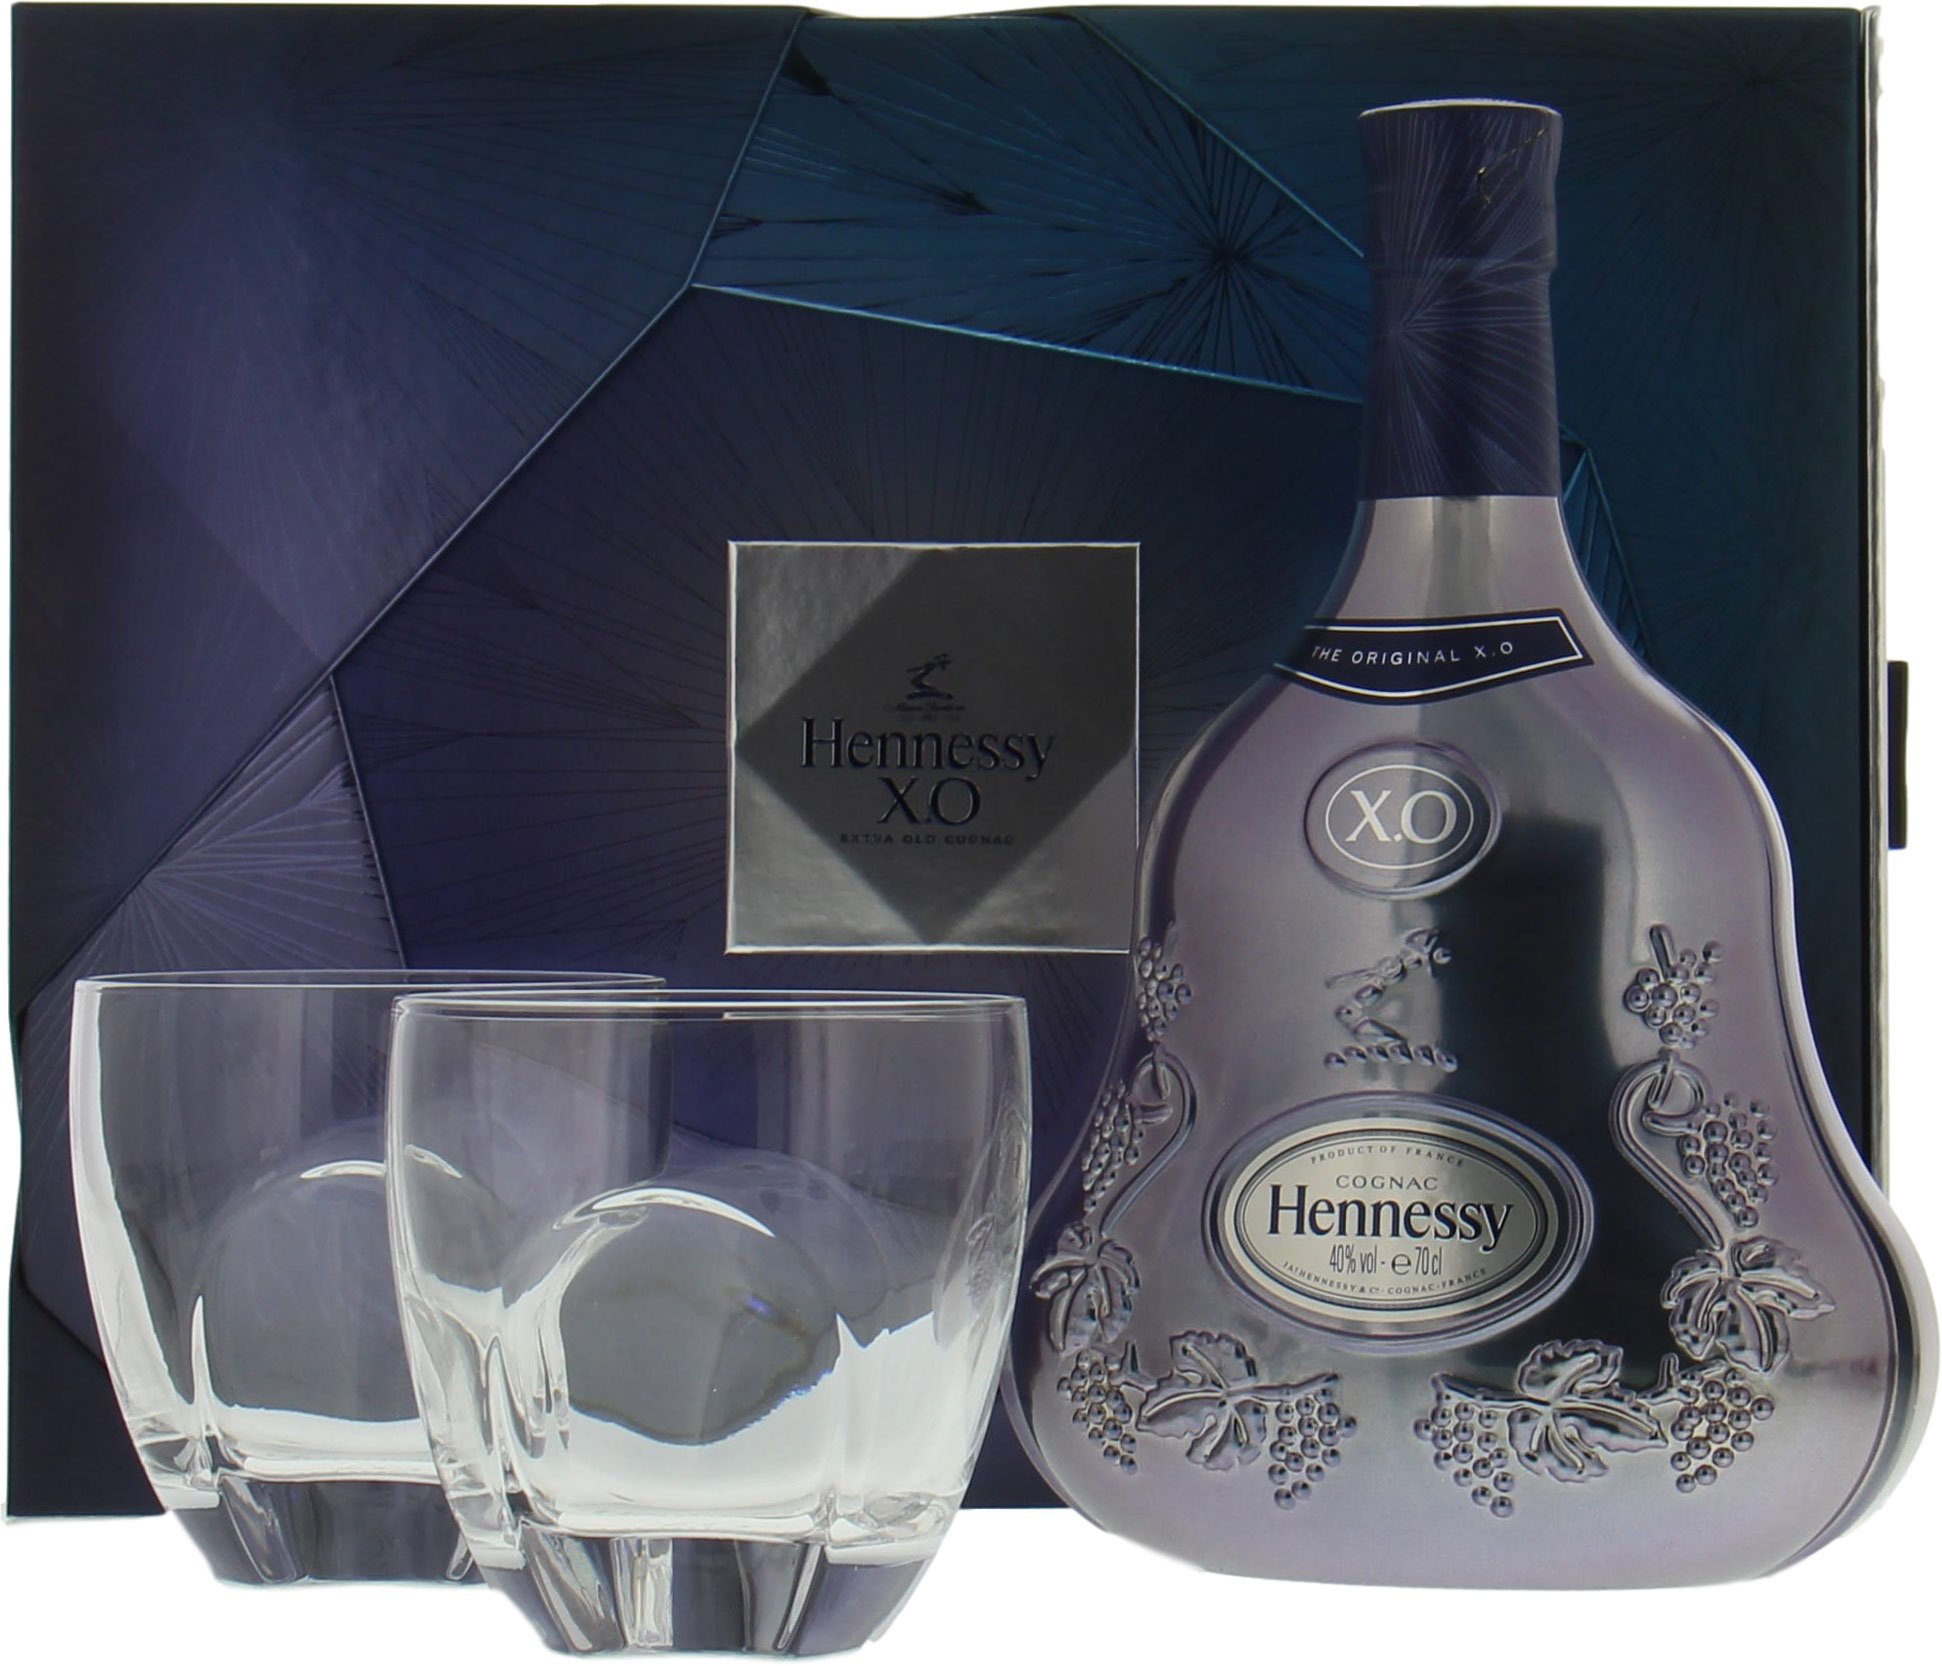 Hennessy - XO Limited Edition Experience coffret with 2 glasses (release 2017) NV